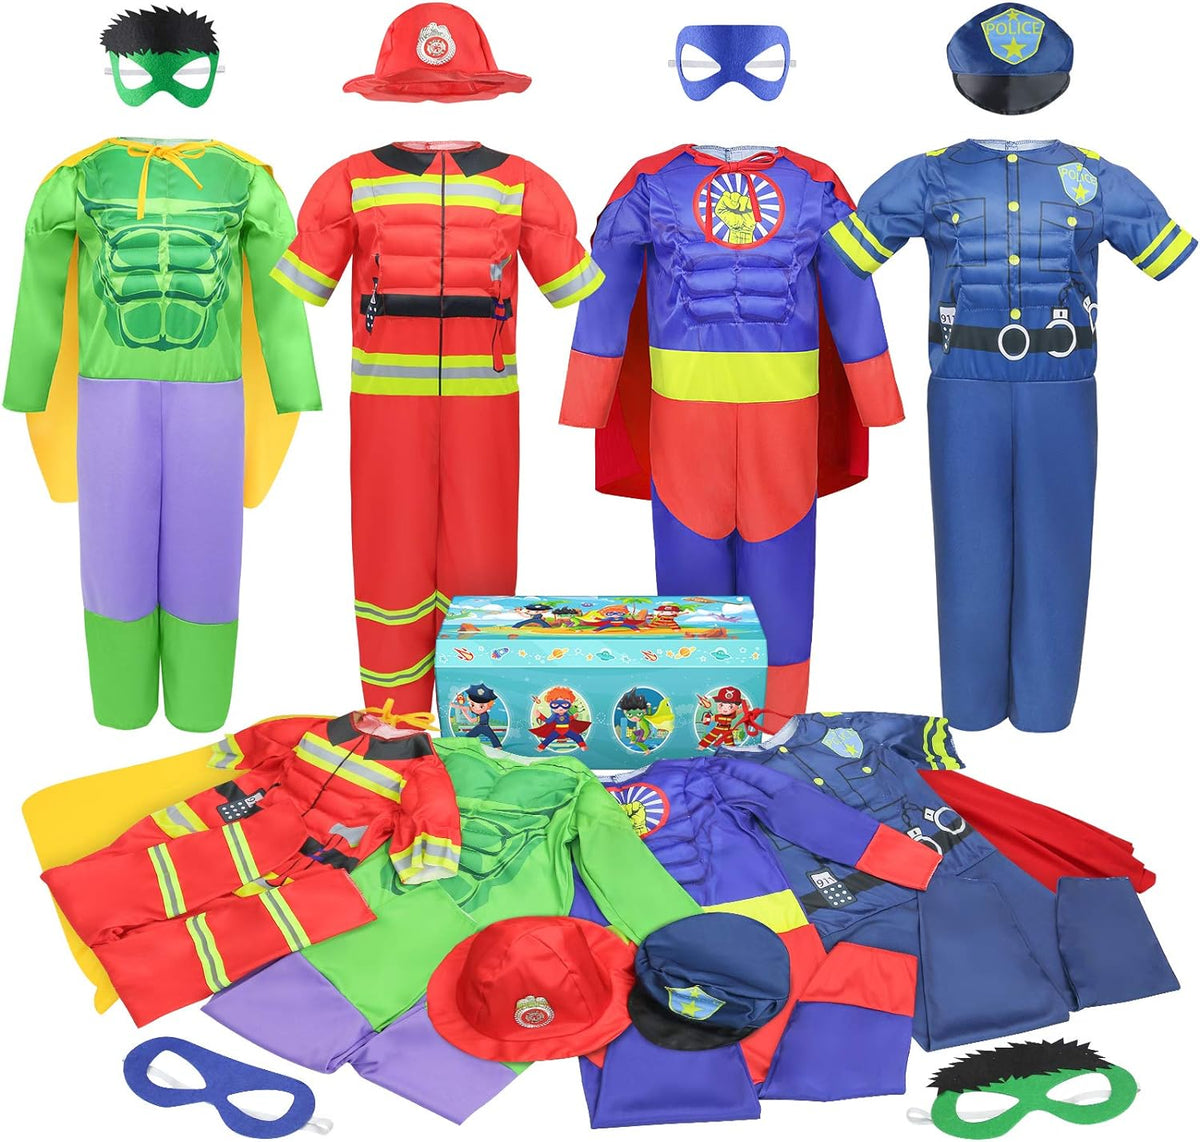 Boys Muscle Chest Dress up Costumes Set Trunk with Superhero, Policeman, Fireman, Kids Pretend Role Play for Kids Ages 4-7